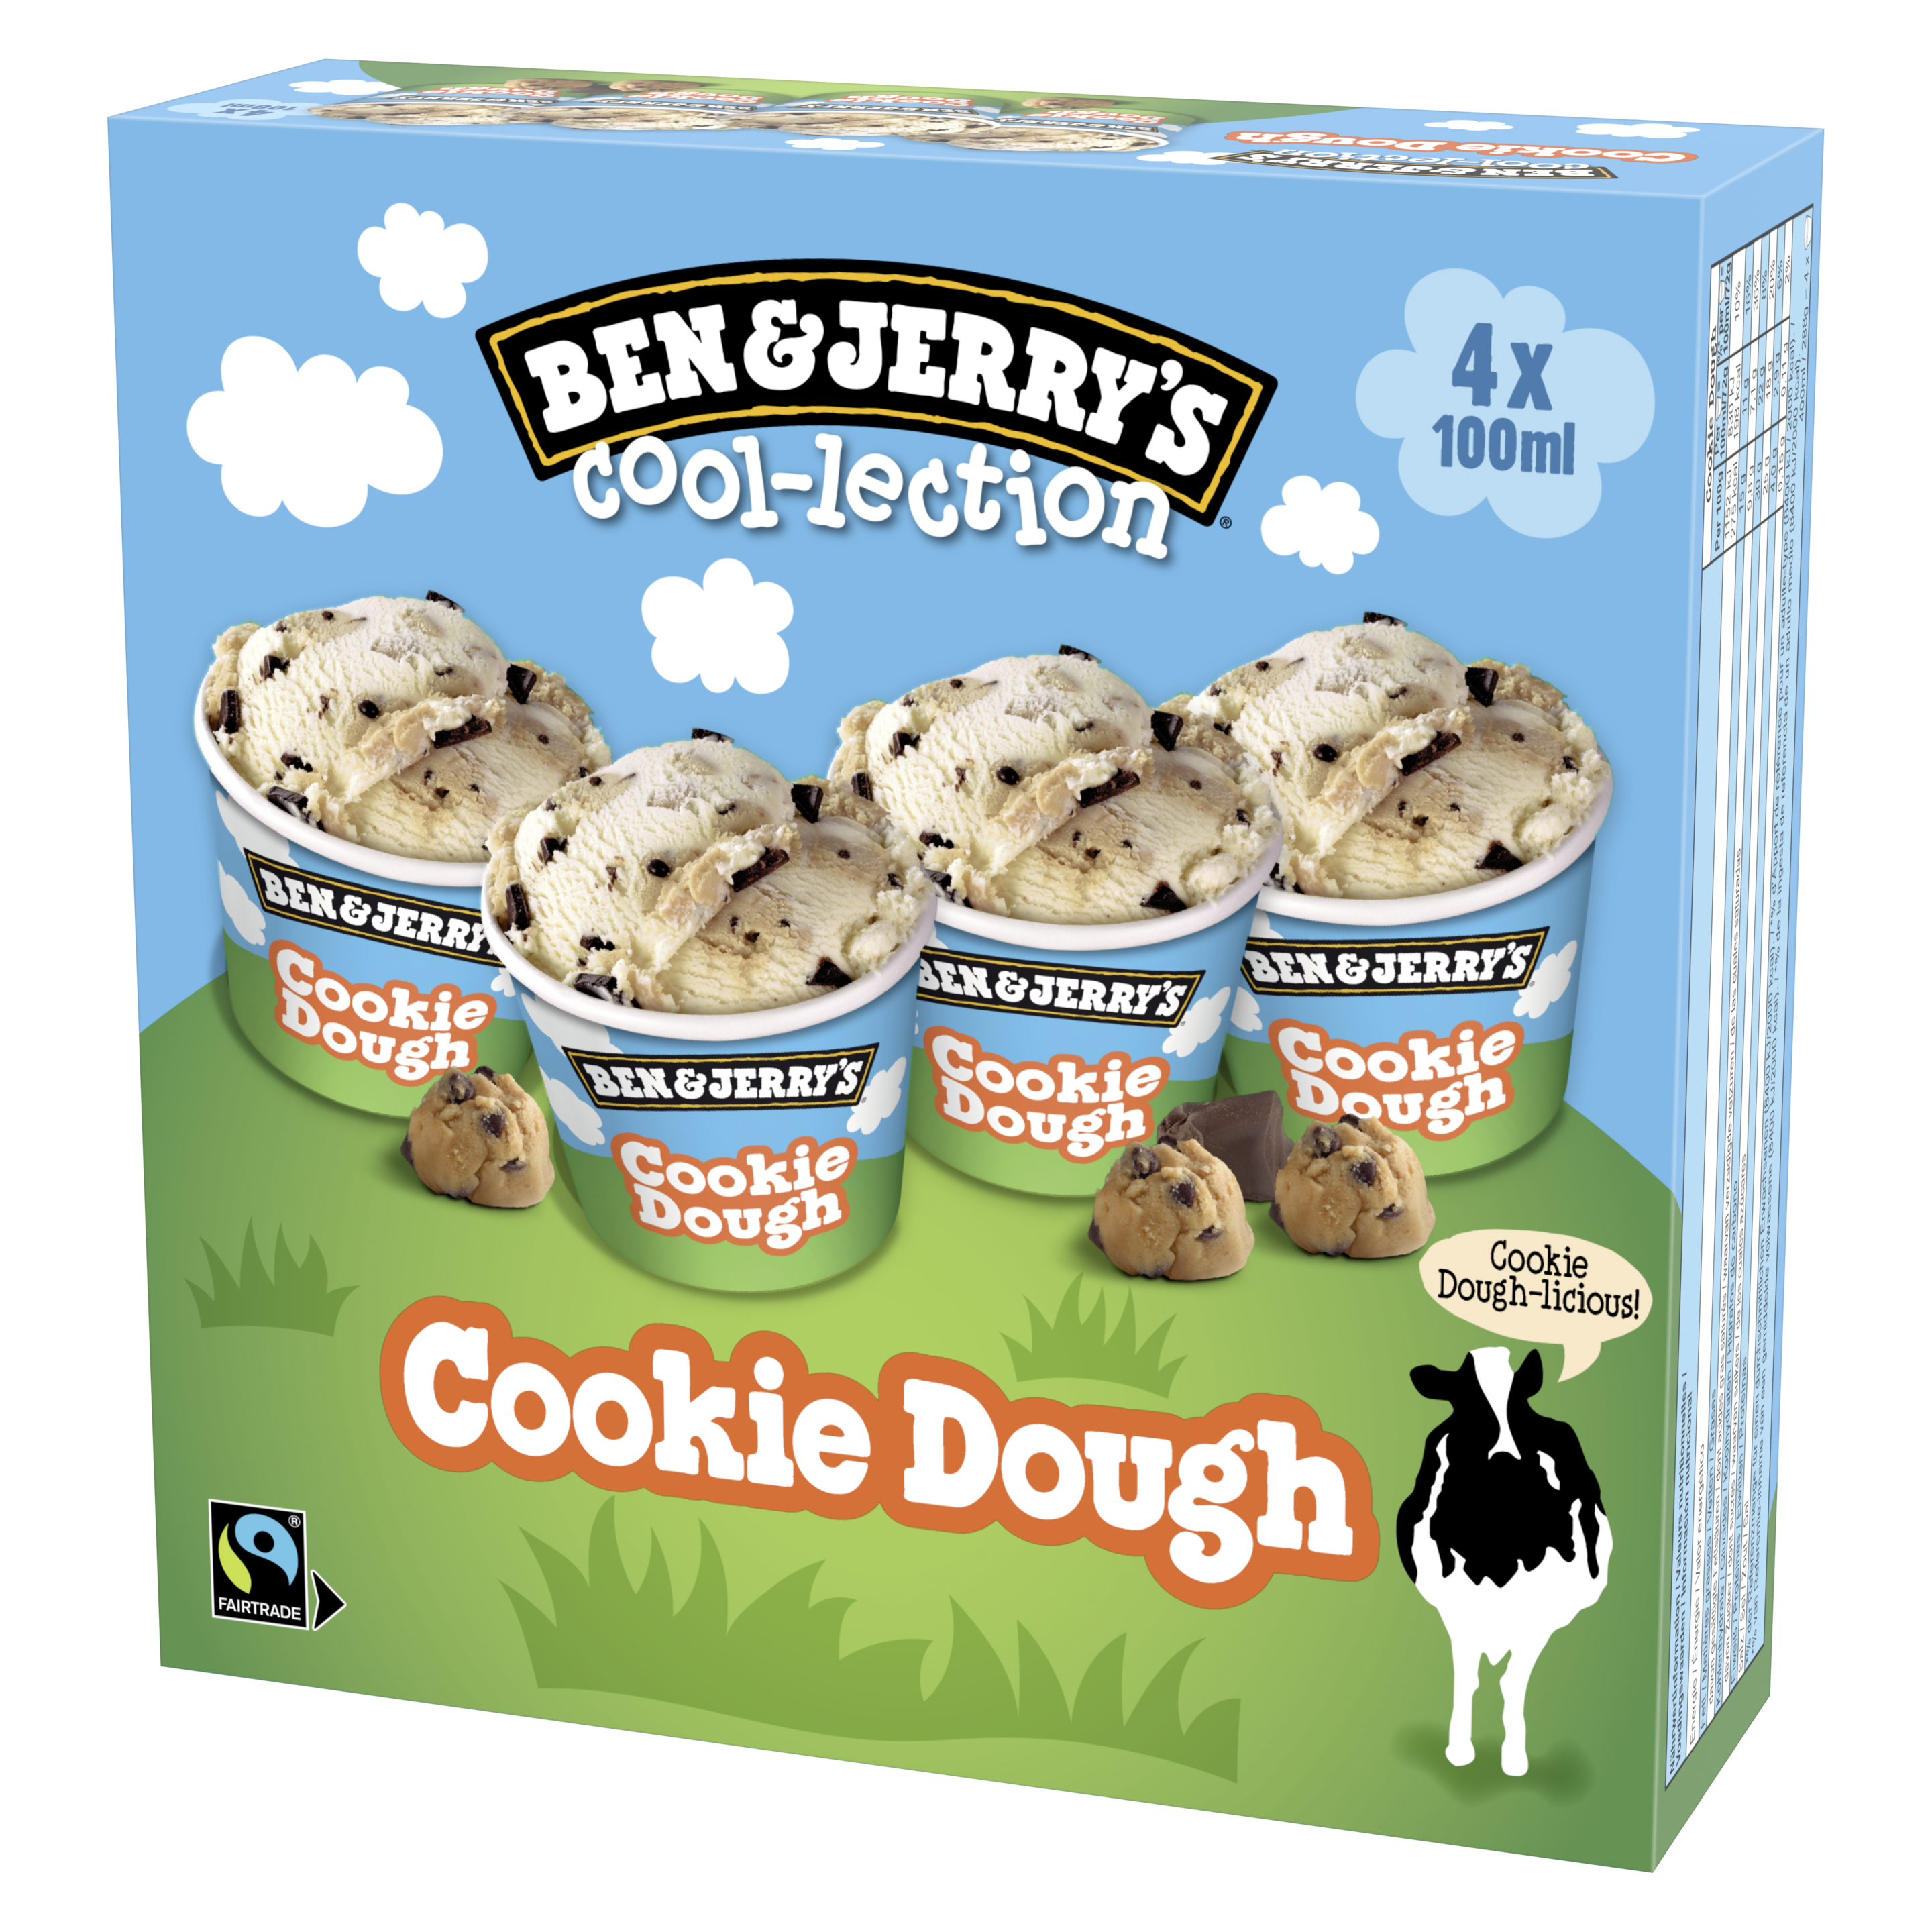 THE COOKIE DOUGH COOL-LECTION